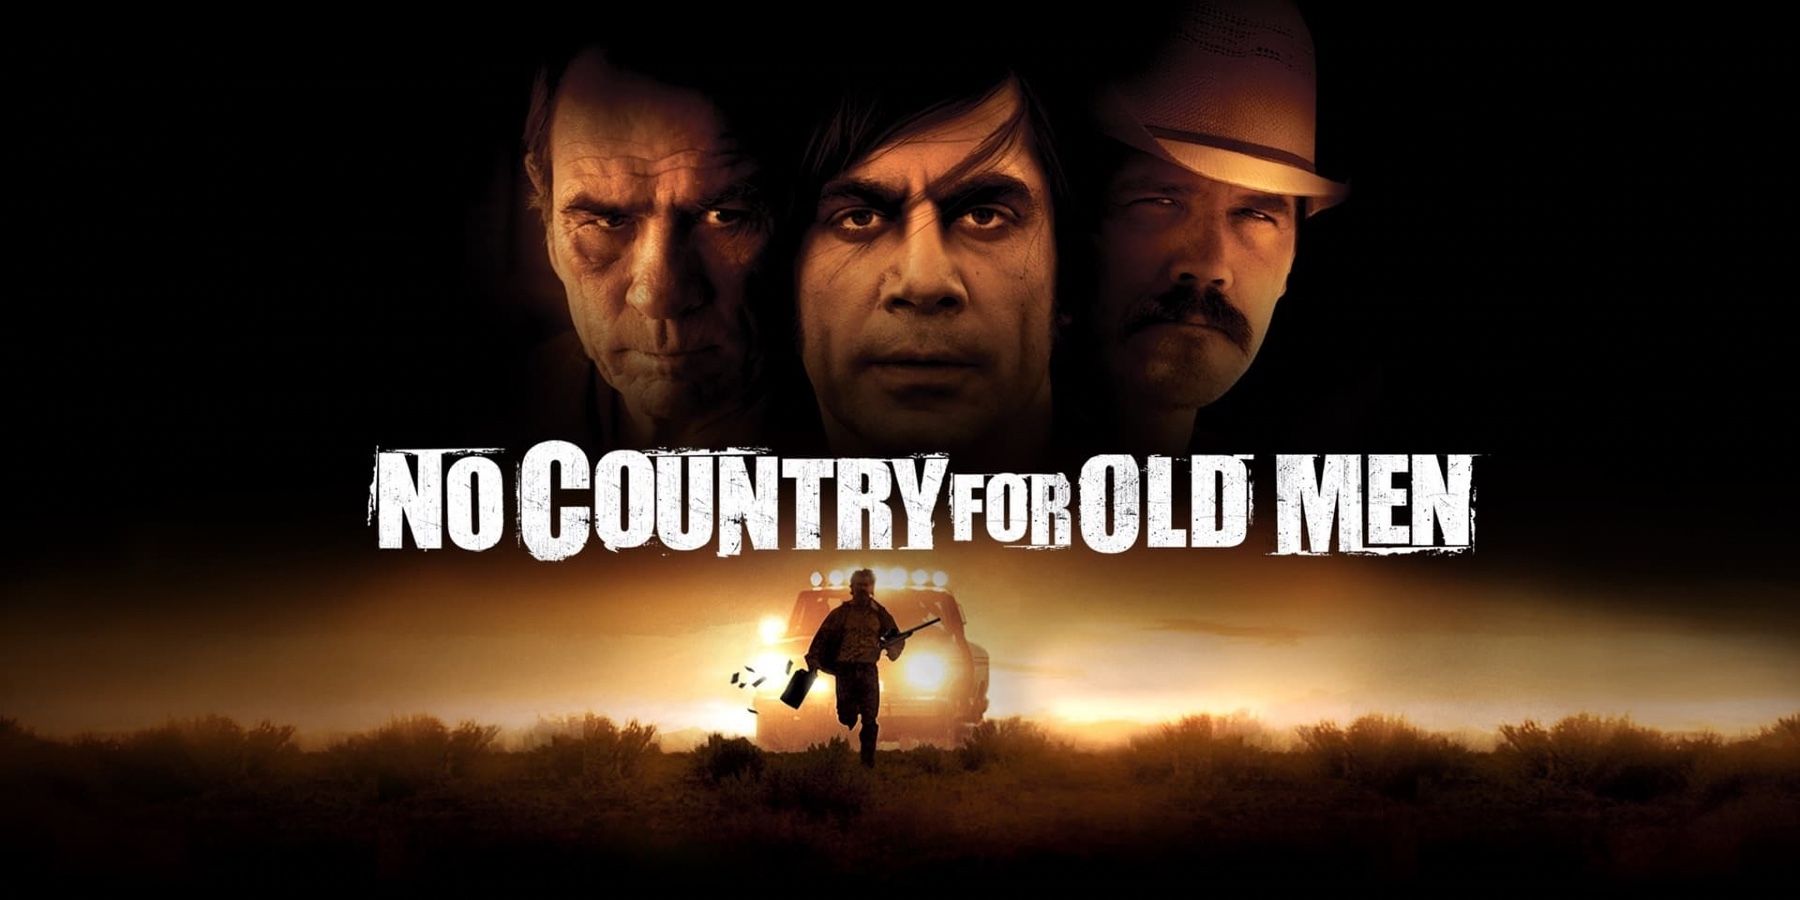 No-Country-For-Old-Men-Coen-Brothers-Film